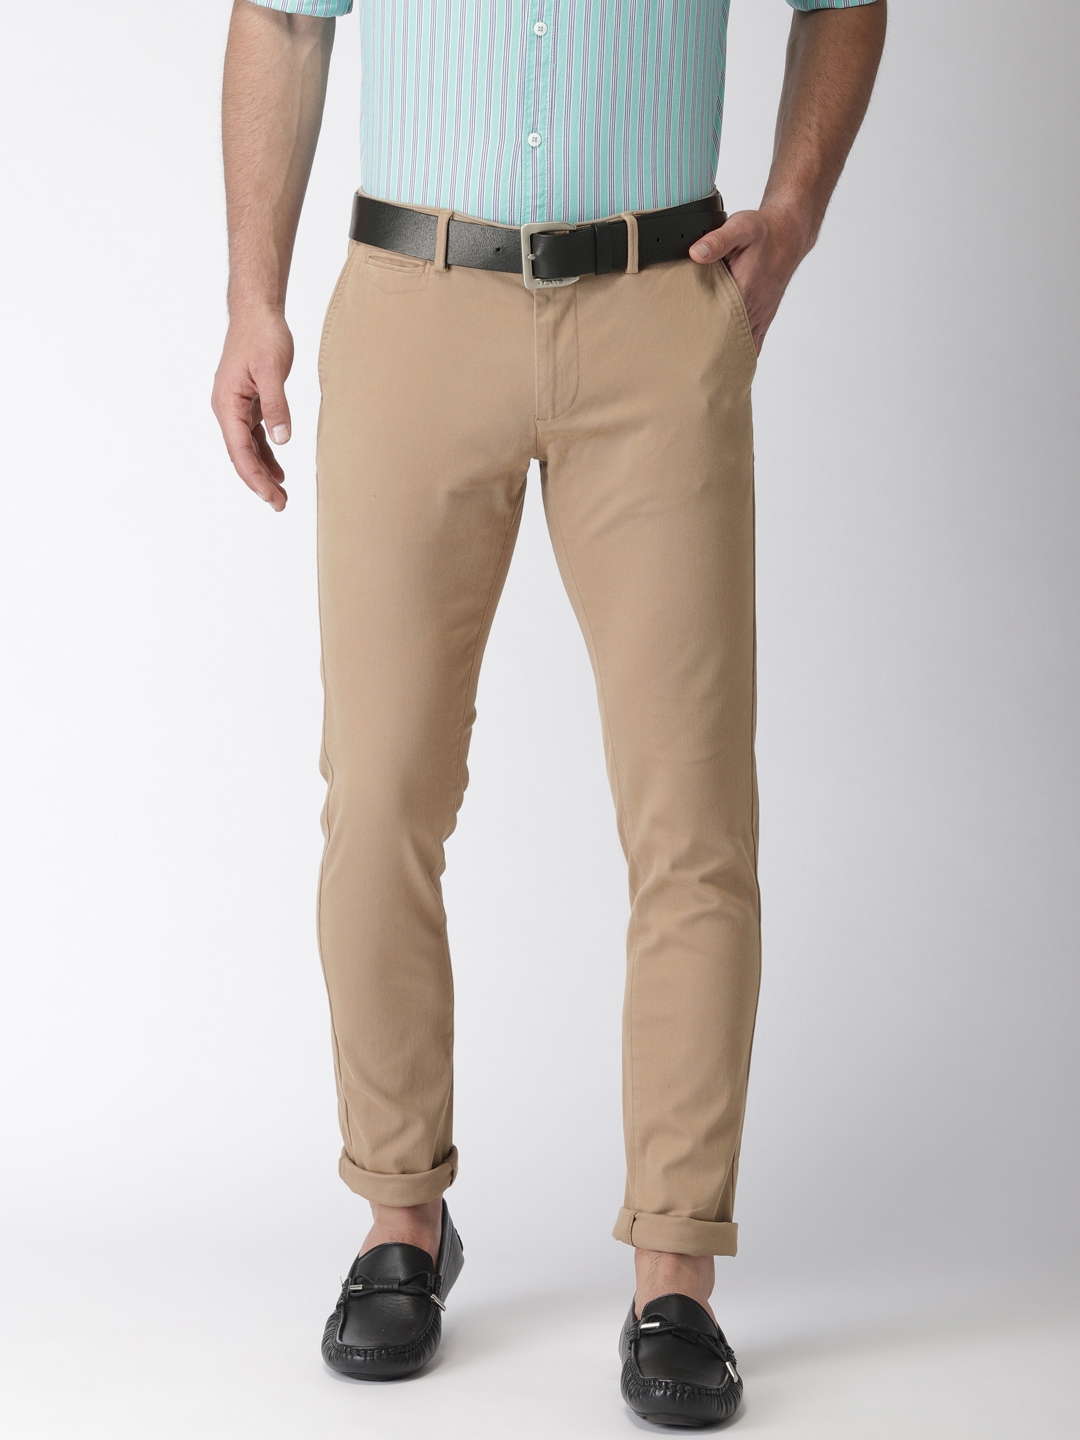 Buy Indian Terrain Mens Solid Blue Flat Front Trouser at Amazonin